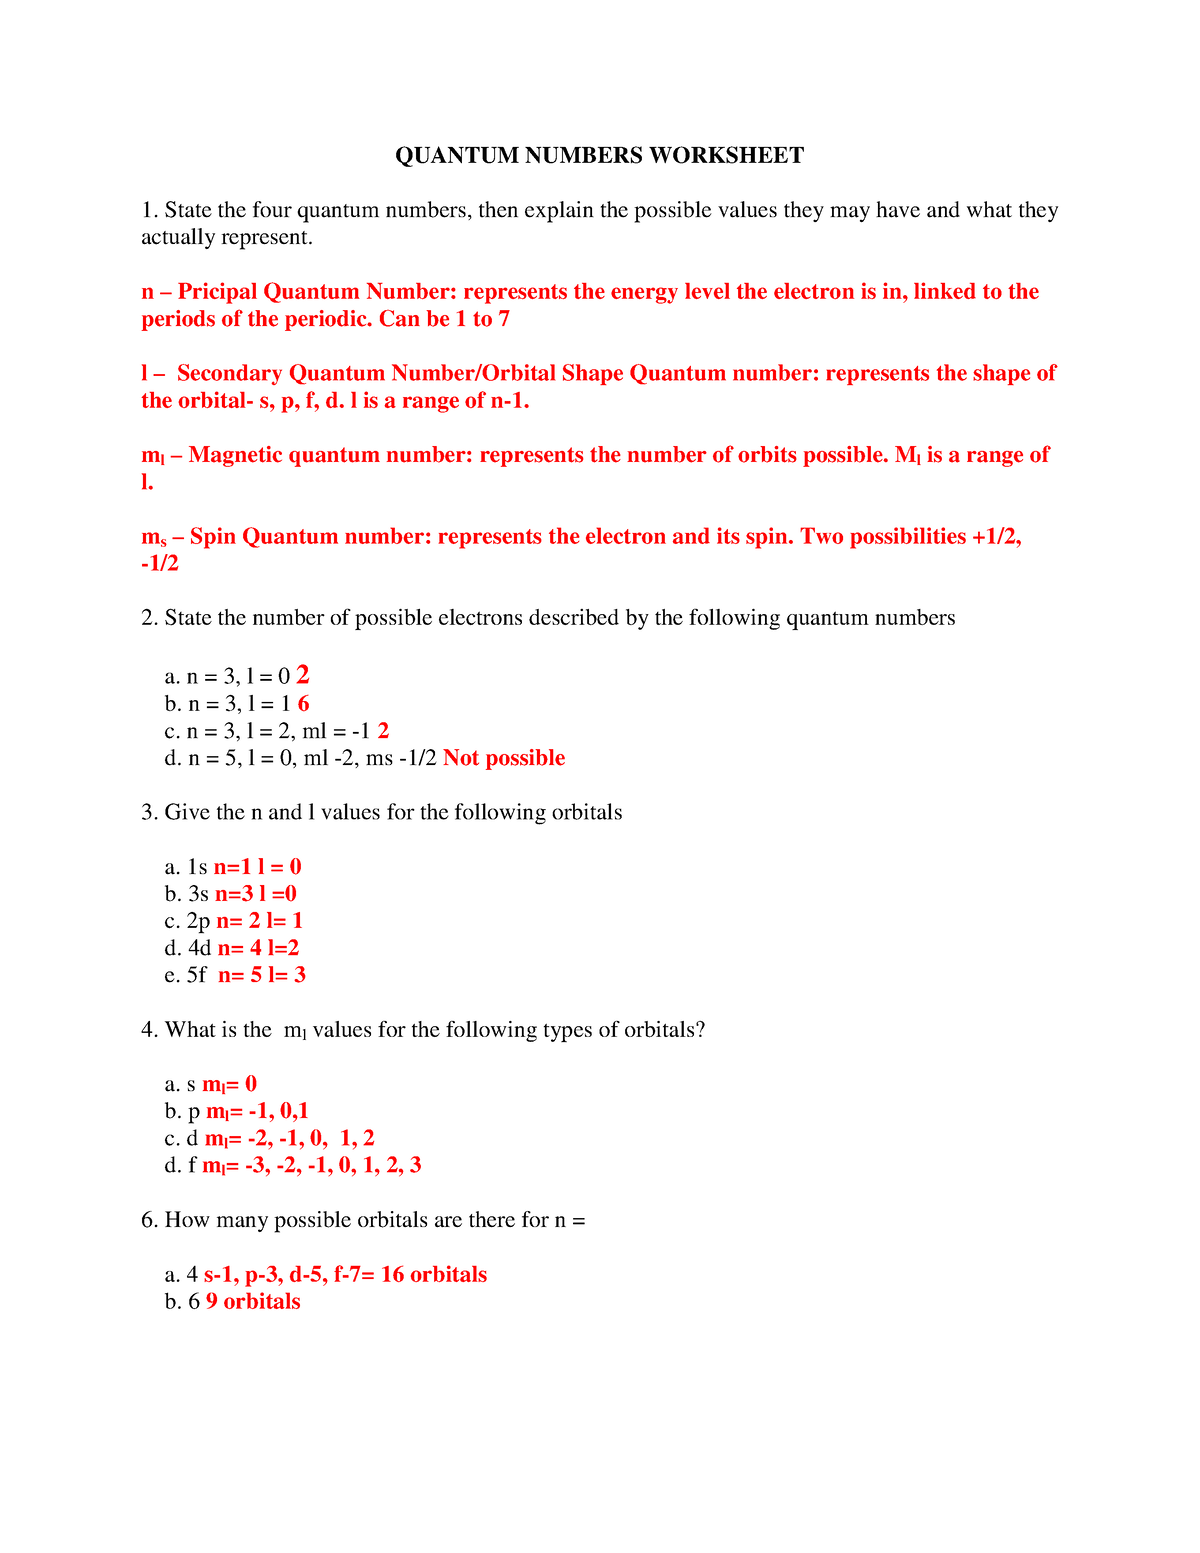 solved-quantum-numbers-worksheet-name-1-state-the-four-chegg